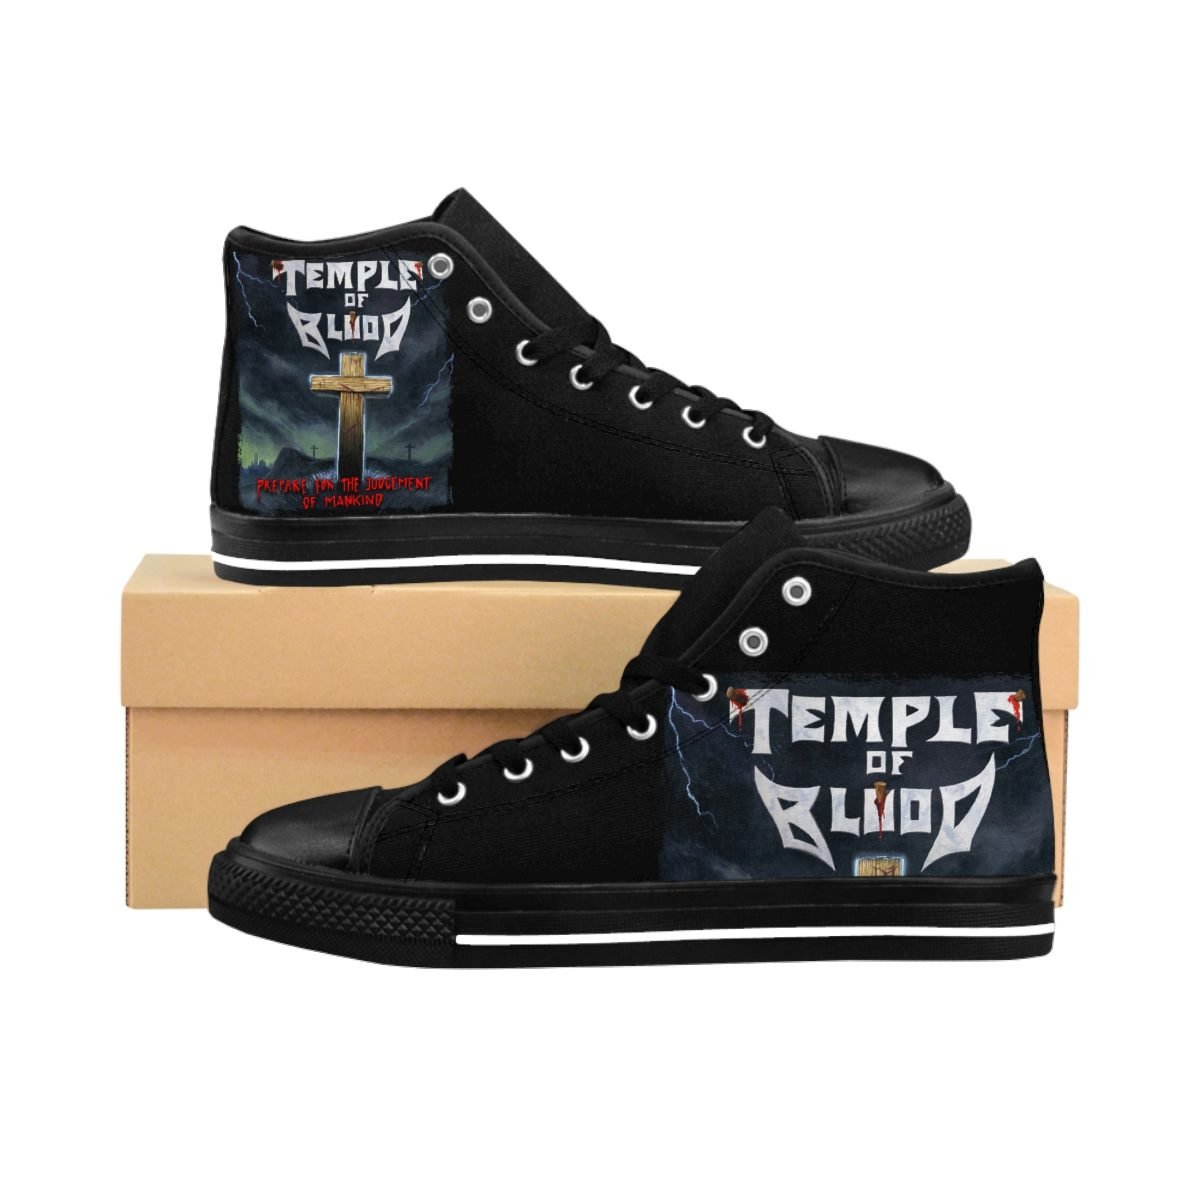 Temple of Blood – Prepare for the Judgment of Mankind Men’s High-top Sneakers